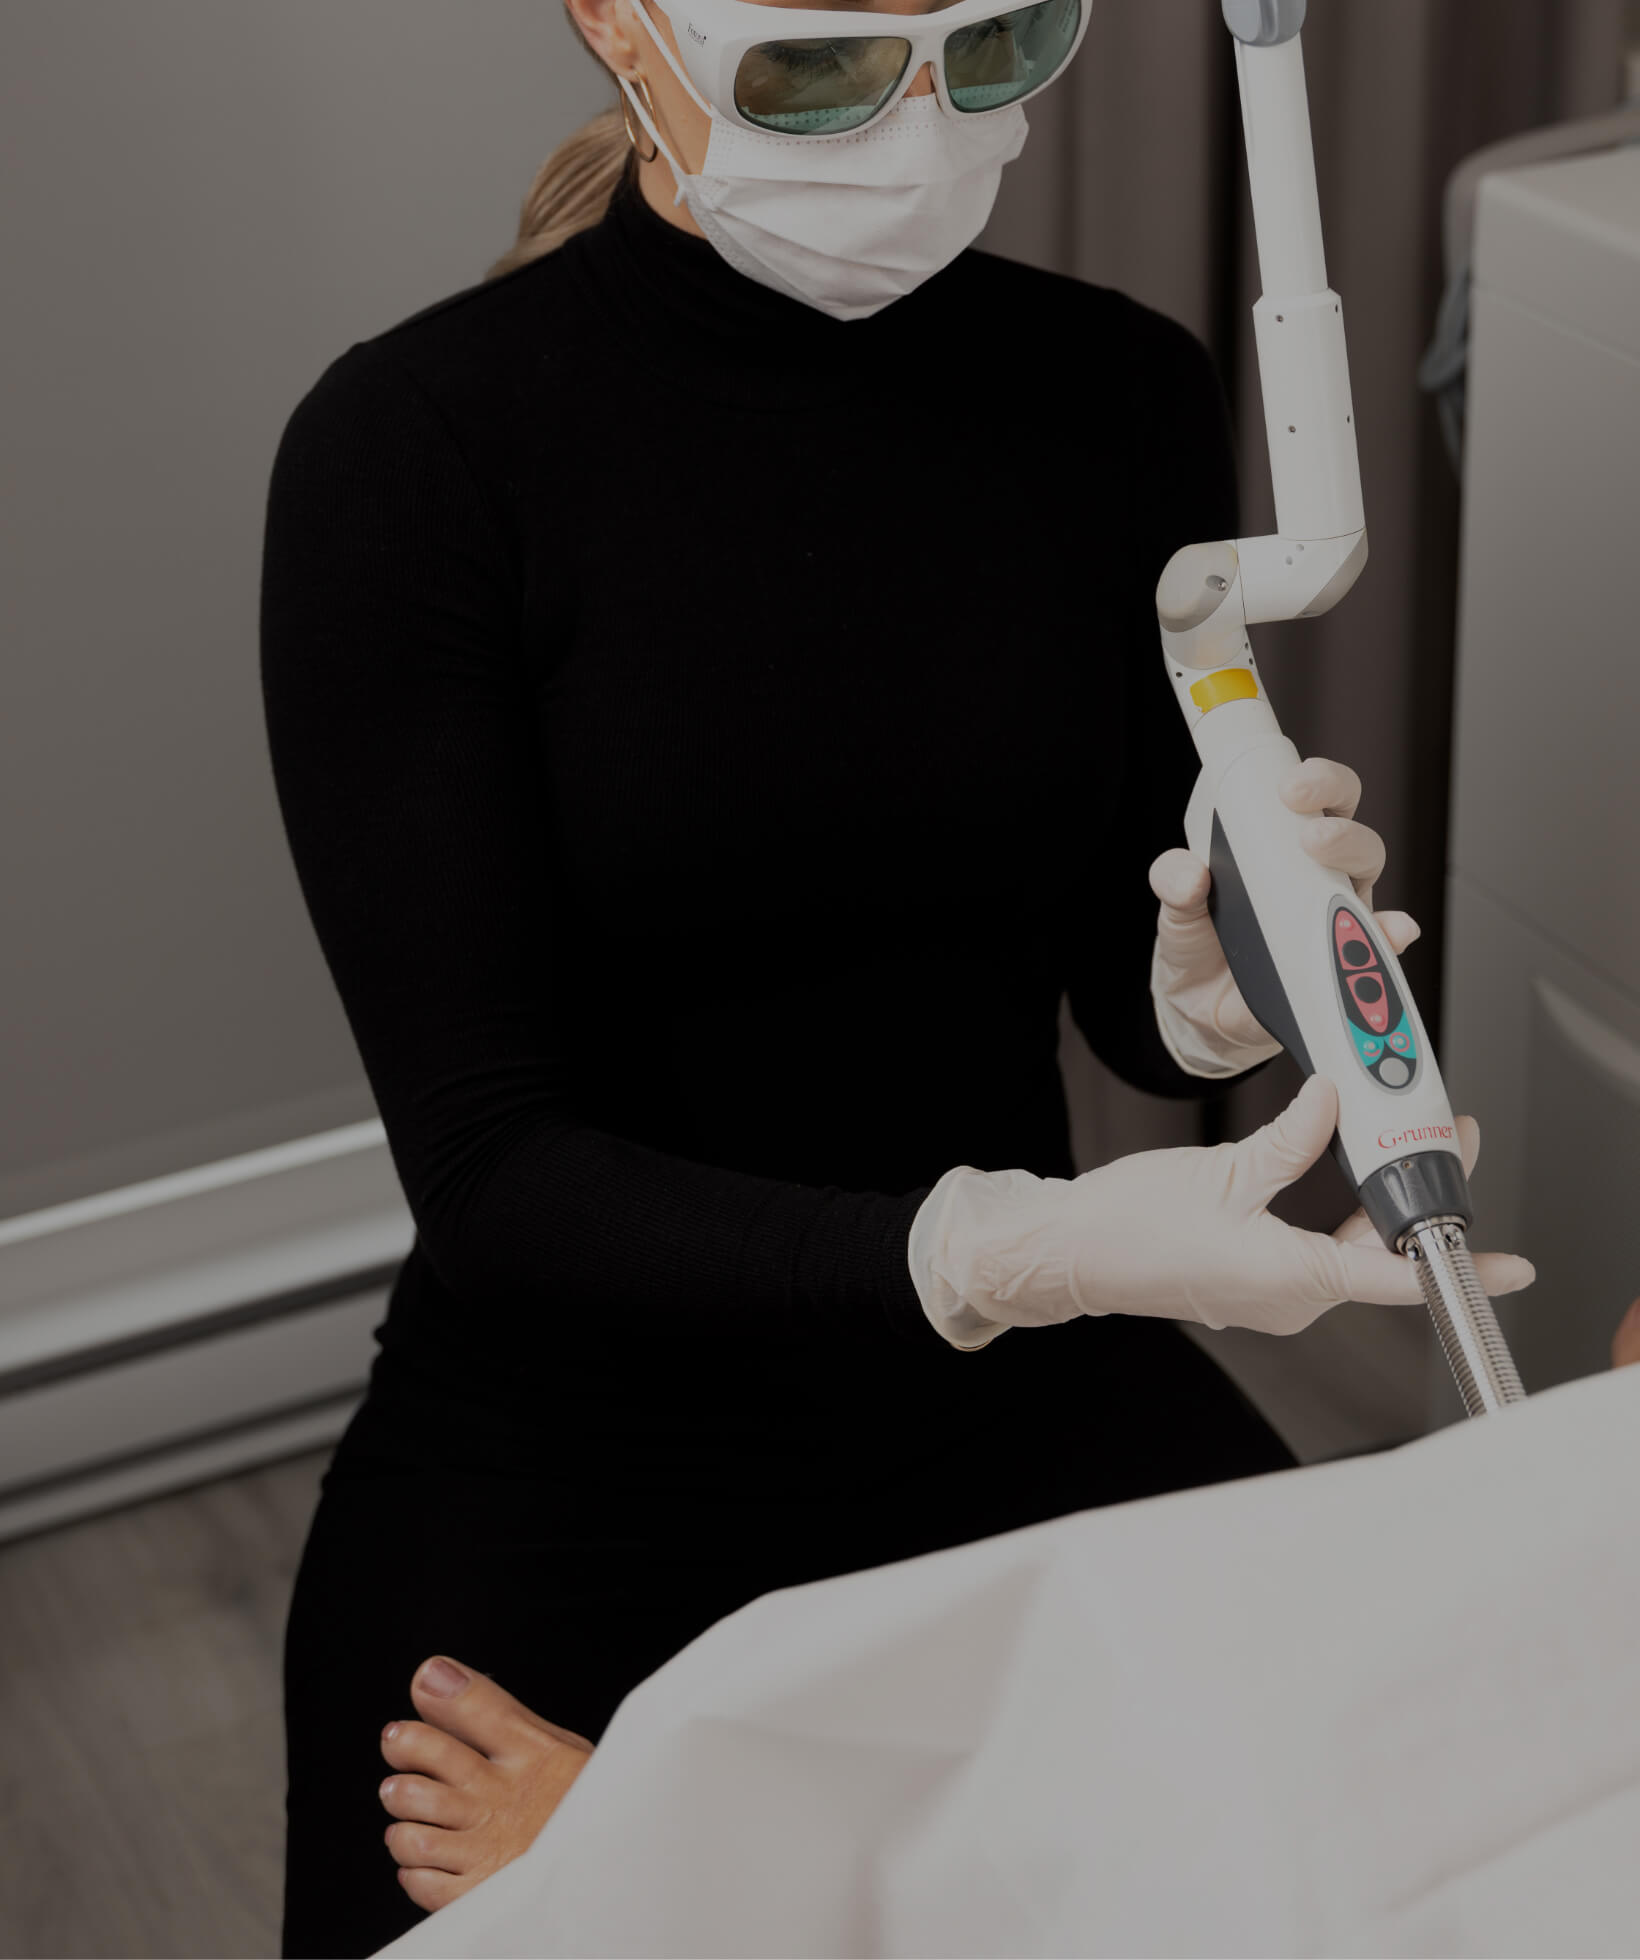 A nurse from Clinique Chloé inserting the disposable tip of the IntimaLase laser into her patient's vagina